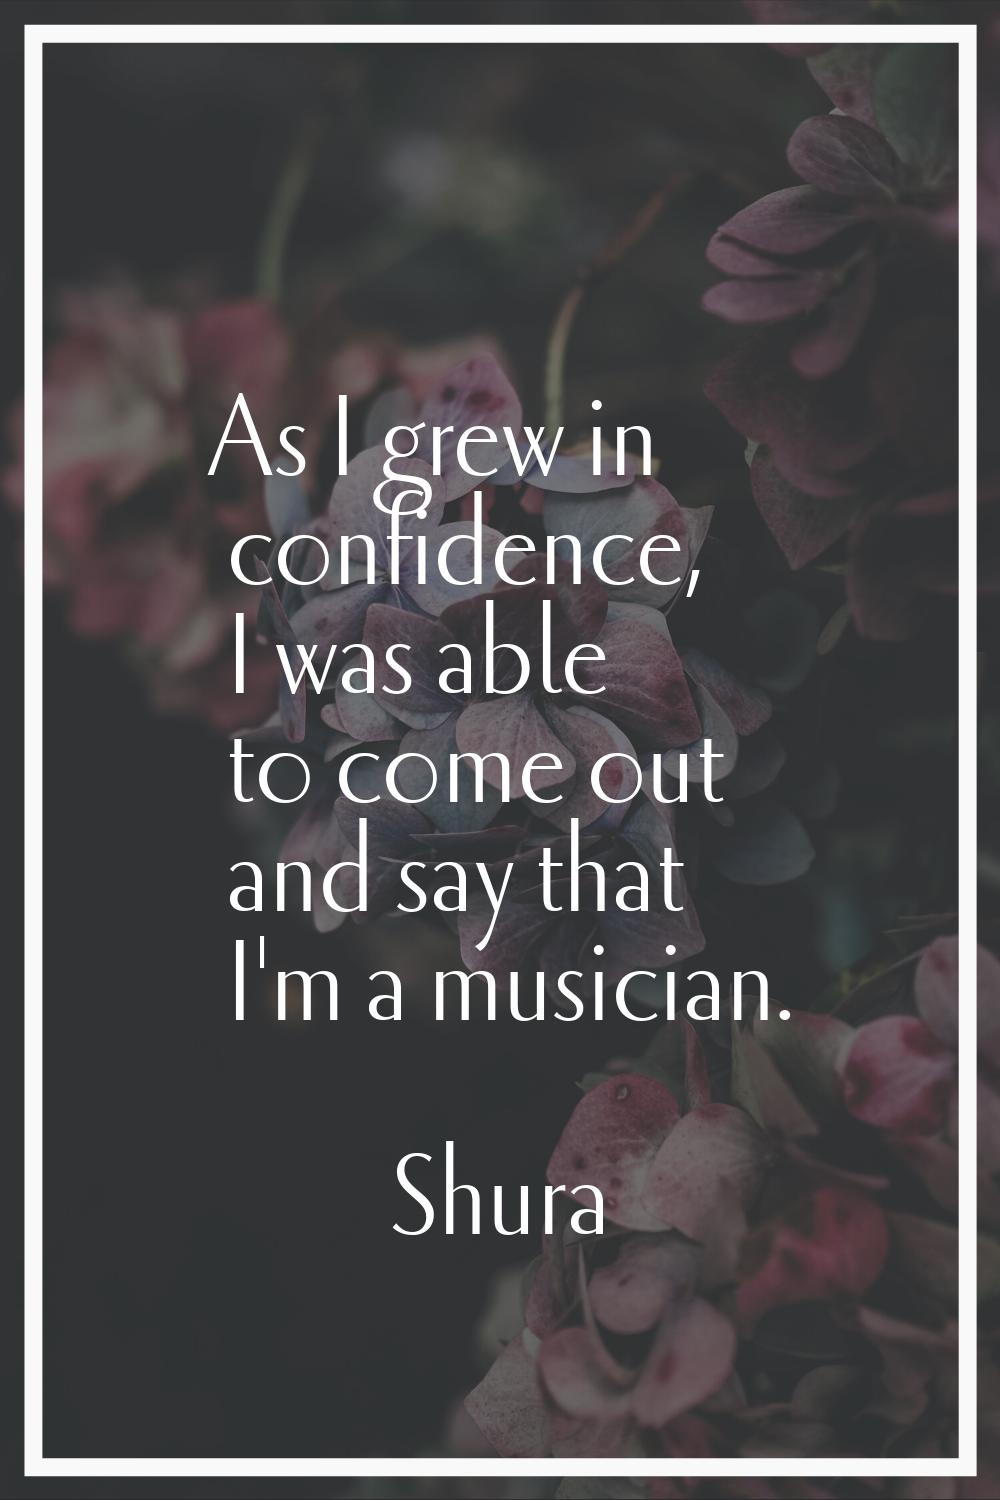 As I grew in confidence, I was able to come out and say that I'm a musician.